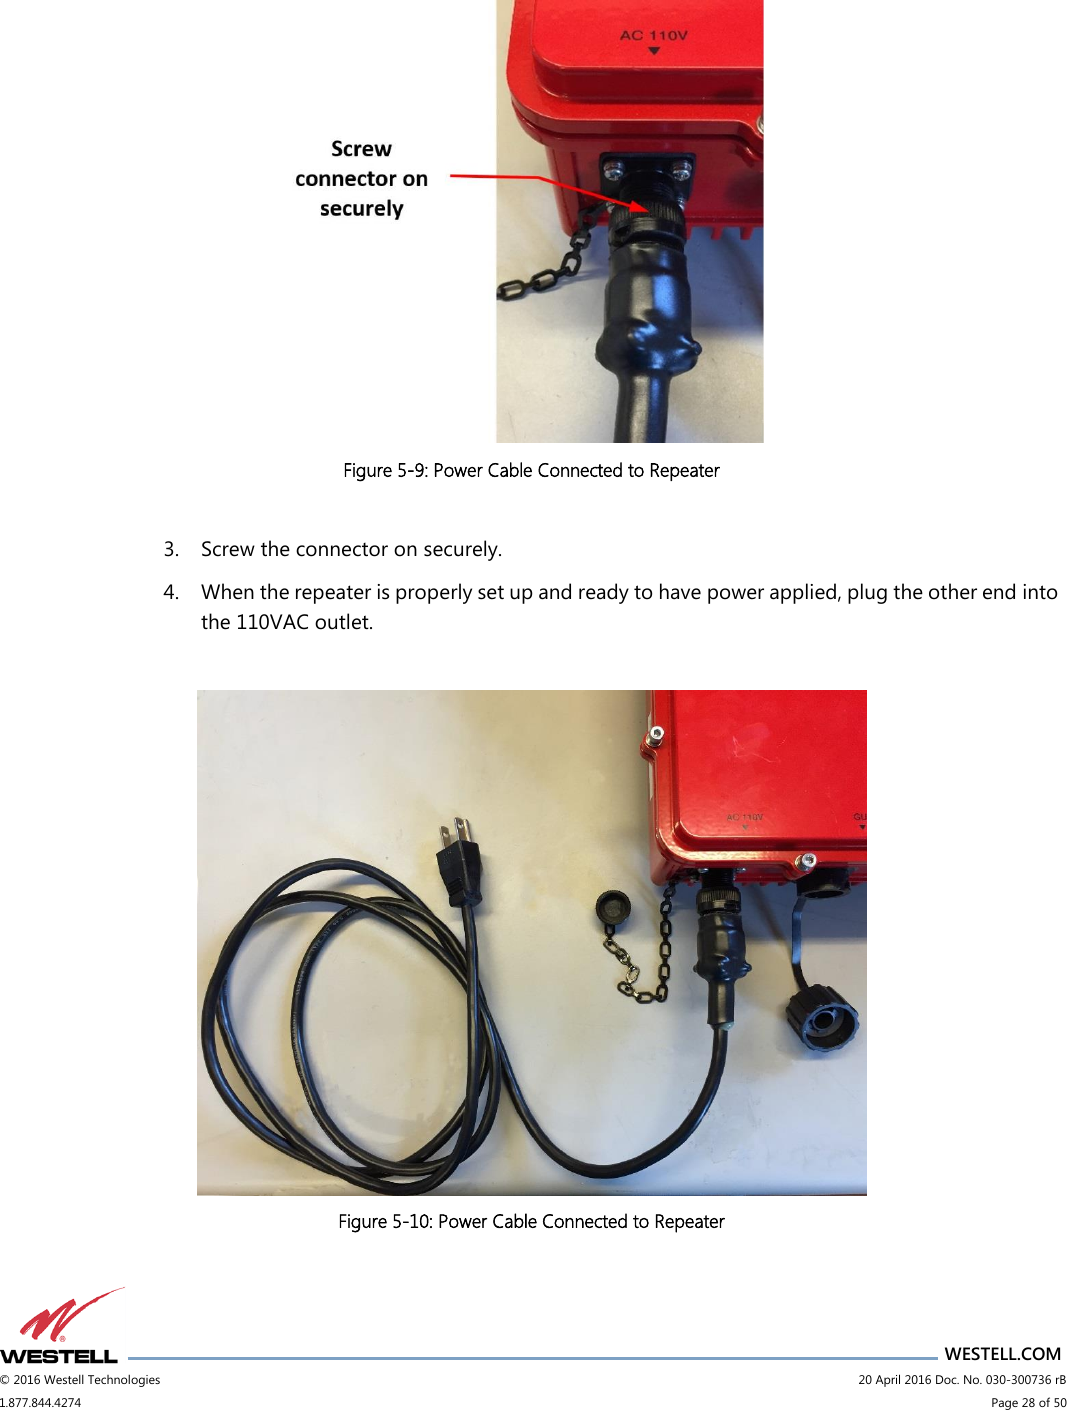                      WESTELL.COM © 2016 Westell Technologies                             20 April 2016 Doc. No. 030-300736 rB 1.877.844.4274                             Page 28 of 50    Figure 5-9: Power Cable Connected to Repeater  3. Screw the connector on securely. 4. When the repeater is properly set up and ready to have power applied, plug the other end into the 110VAC outlet.   Figure 5-10: Power Cable Connected to Repeater 